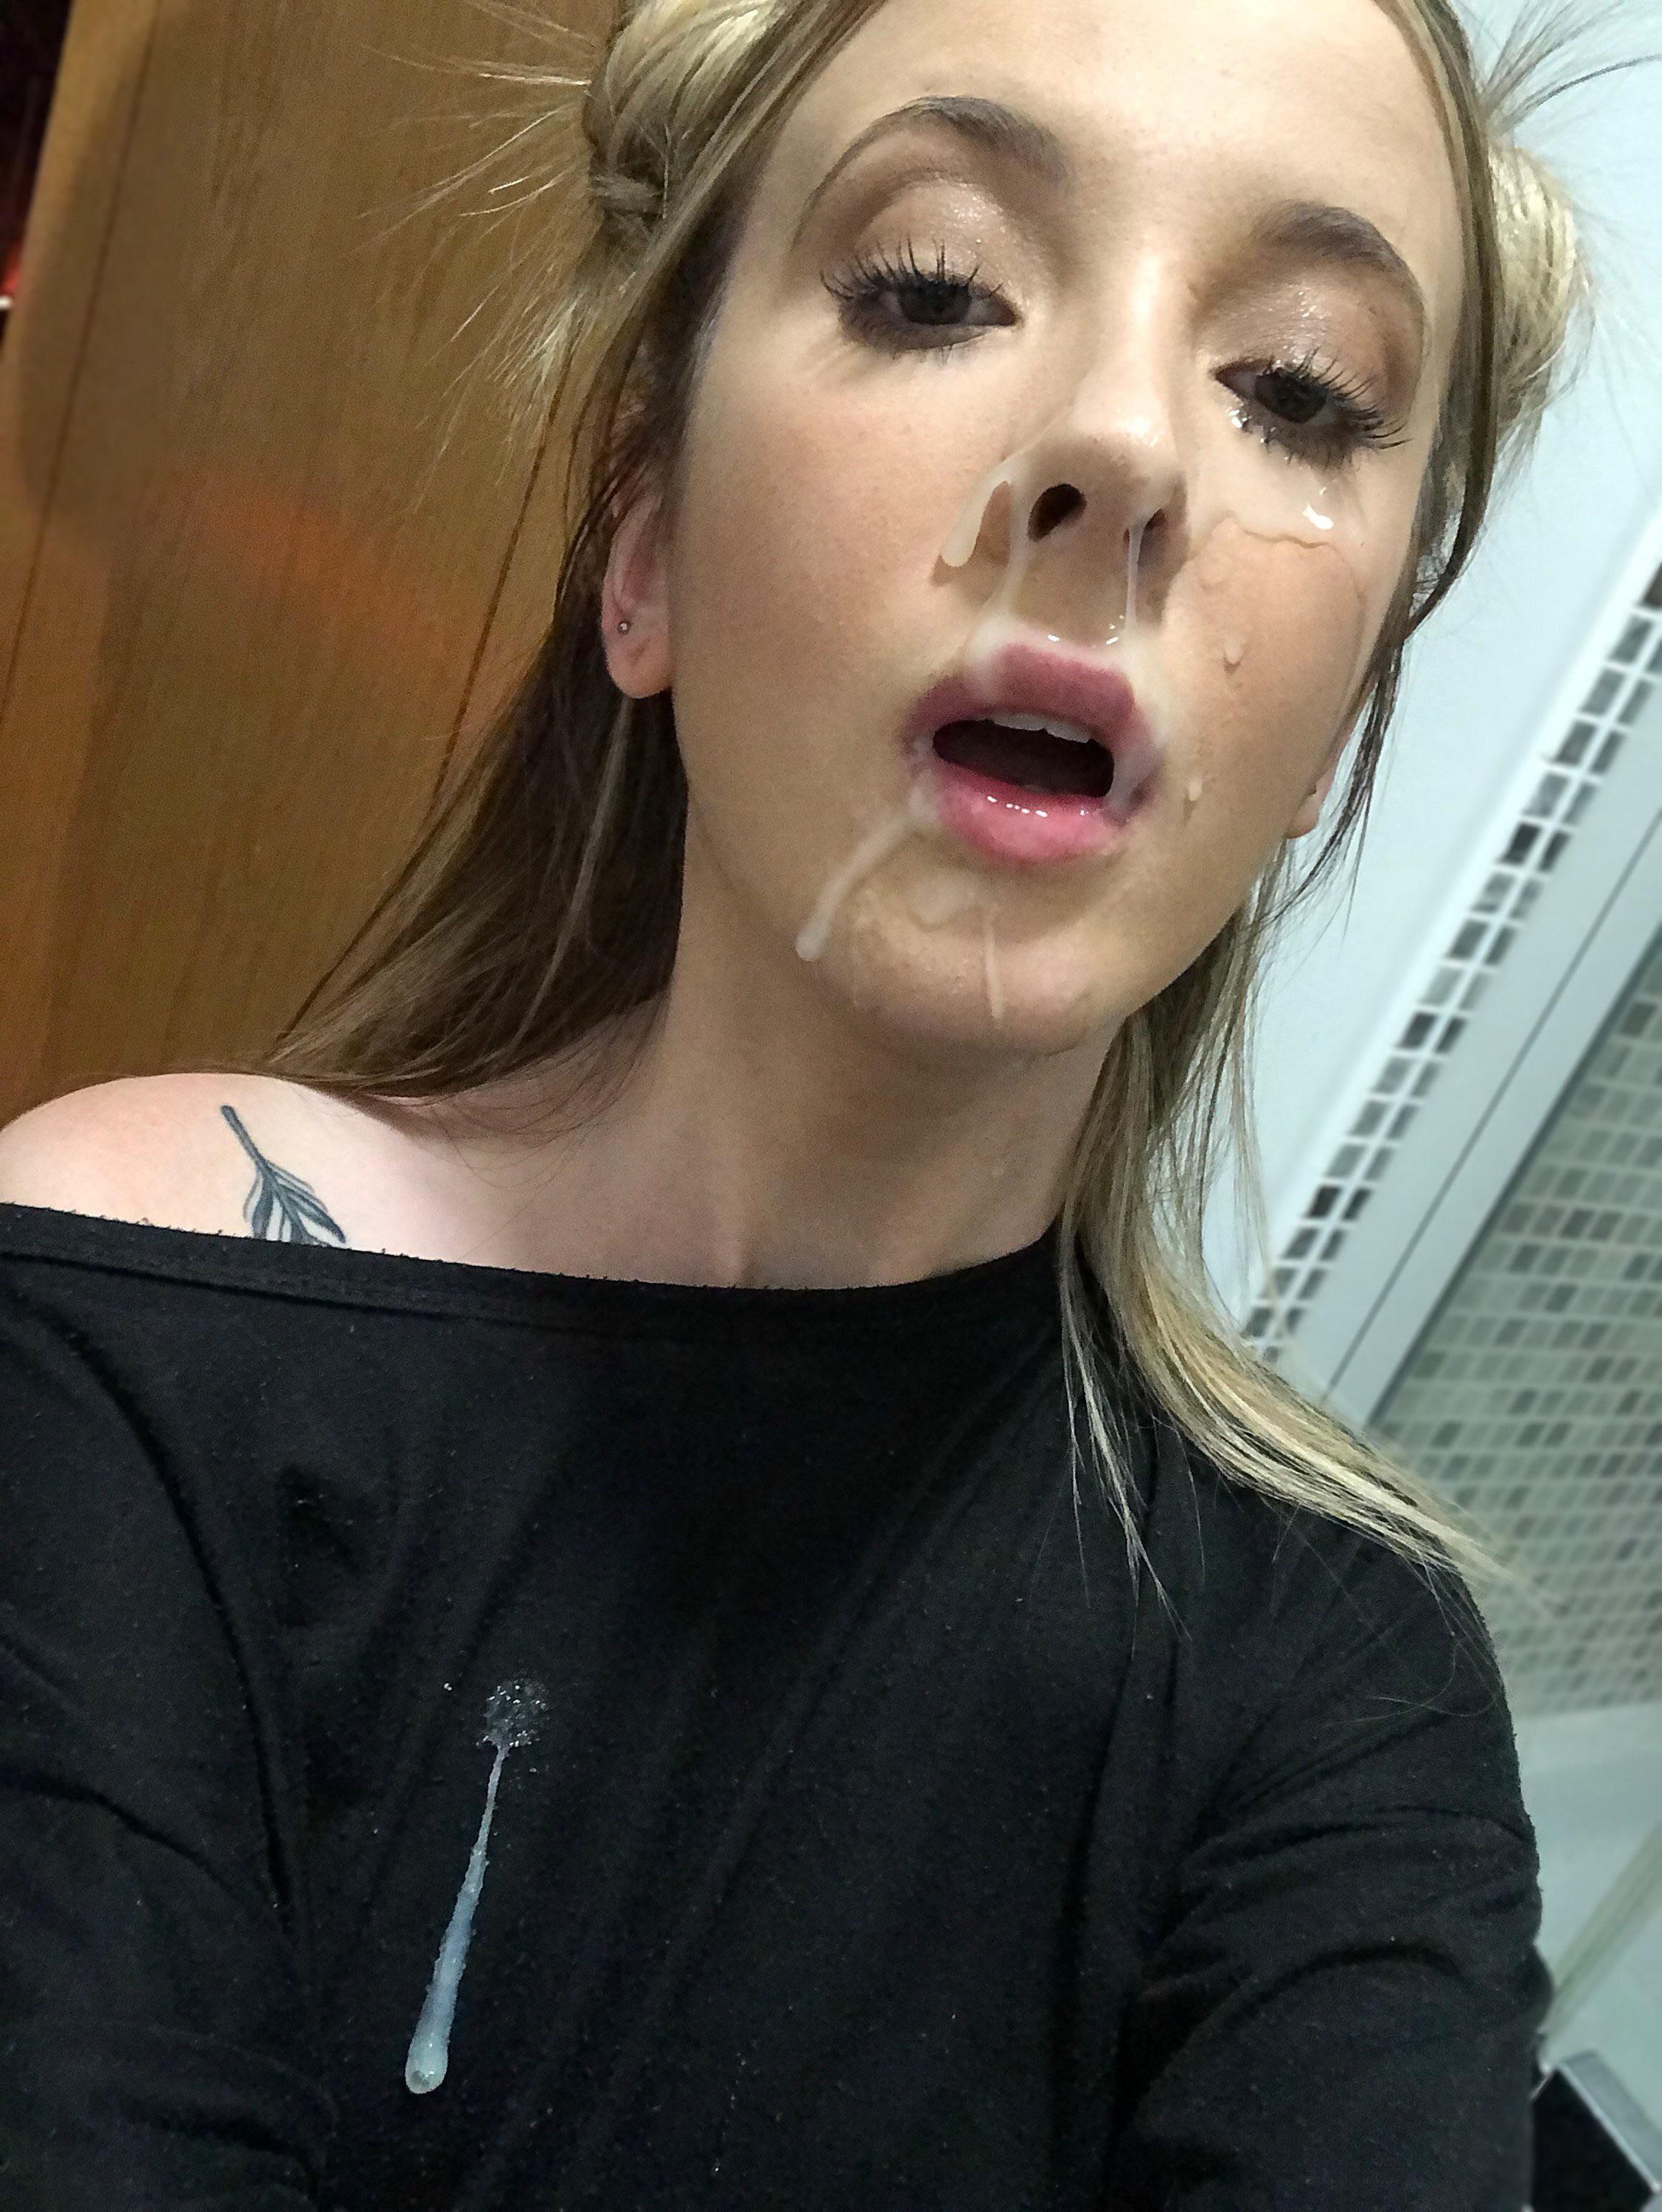 zoey holloway free tubes look excite and delight zoey #Tattoo  #Blonde  #Petite  #Teen  #NonNude  #CumOnFace  #Facial  #Selfshot  #Selfie  #Hot  #Sexy  #Lewd  #Slutty  #CumOnClothes